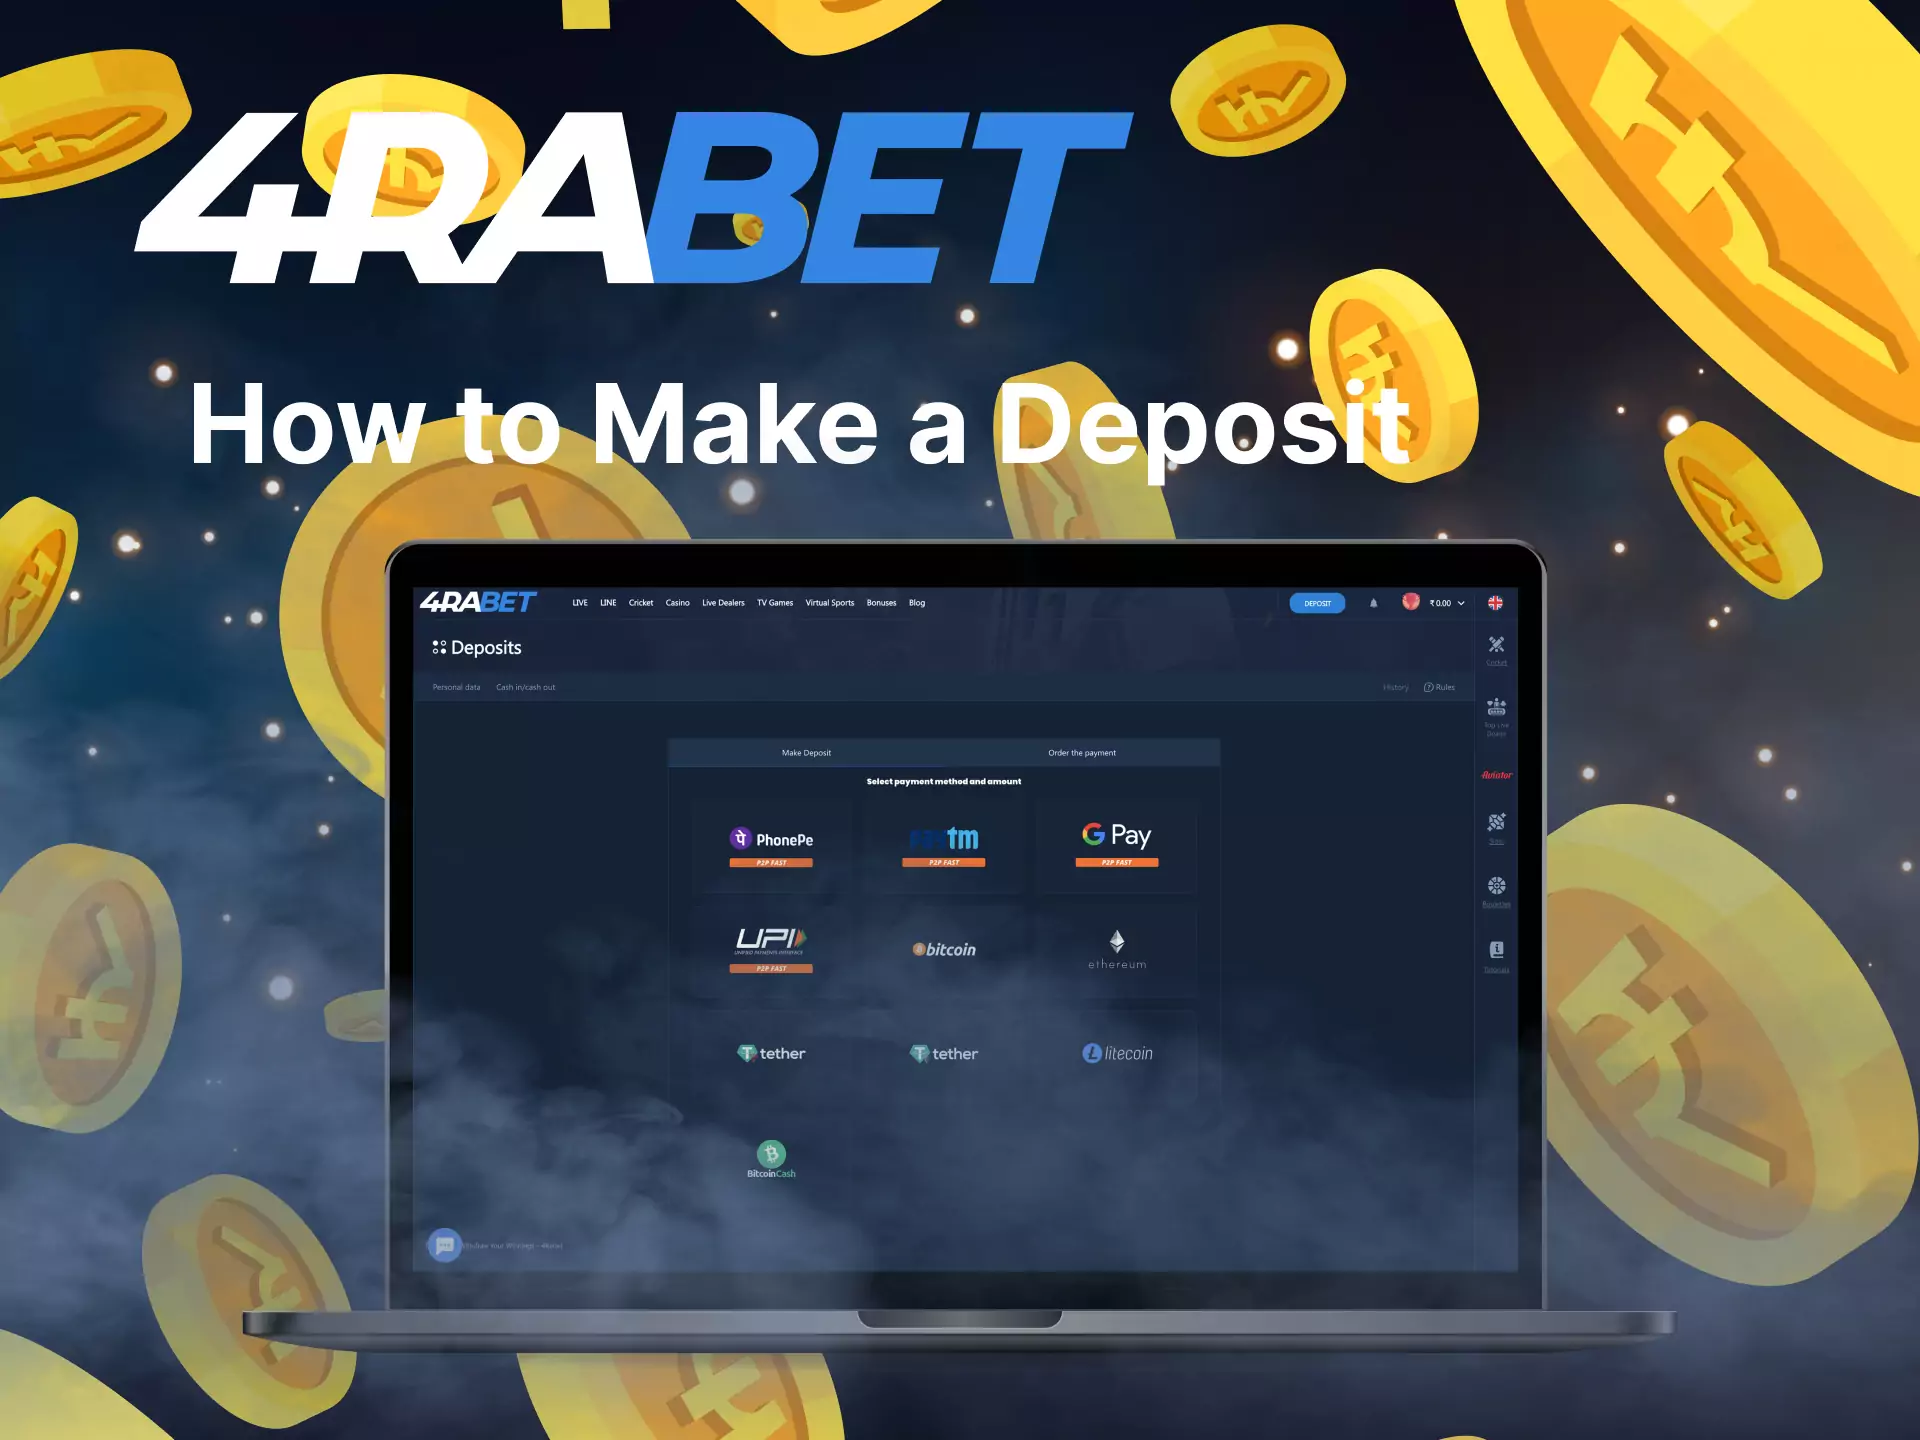 With this instruction, learn how to make a deposit on 4rabet.